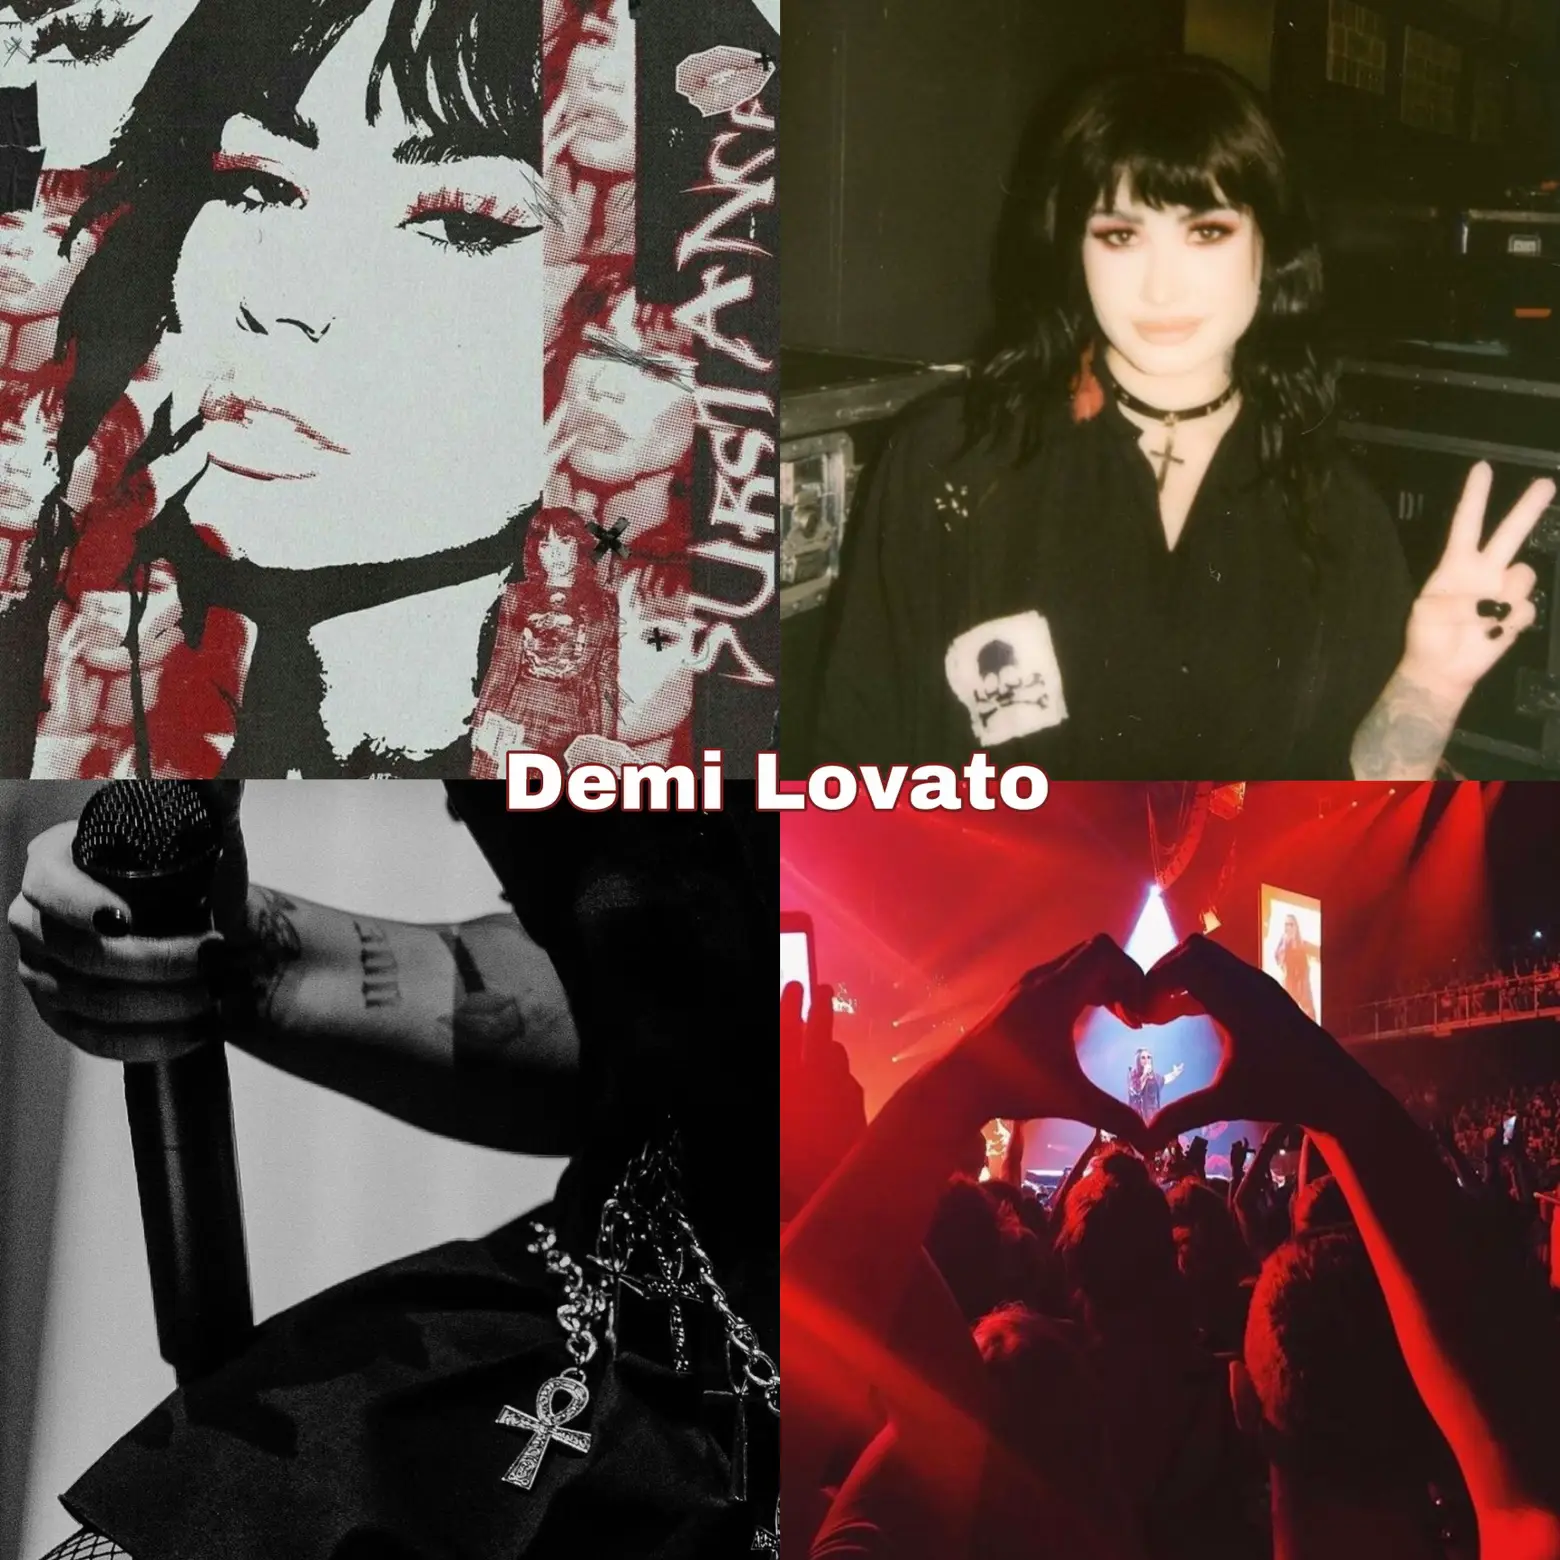  A collage of photos of Demi Lovato.